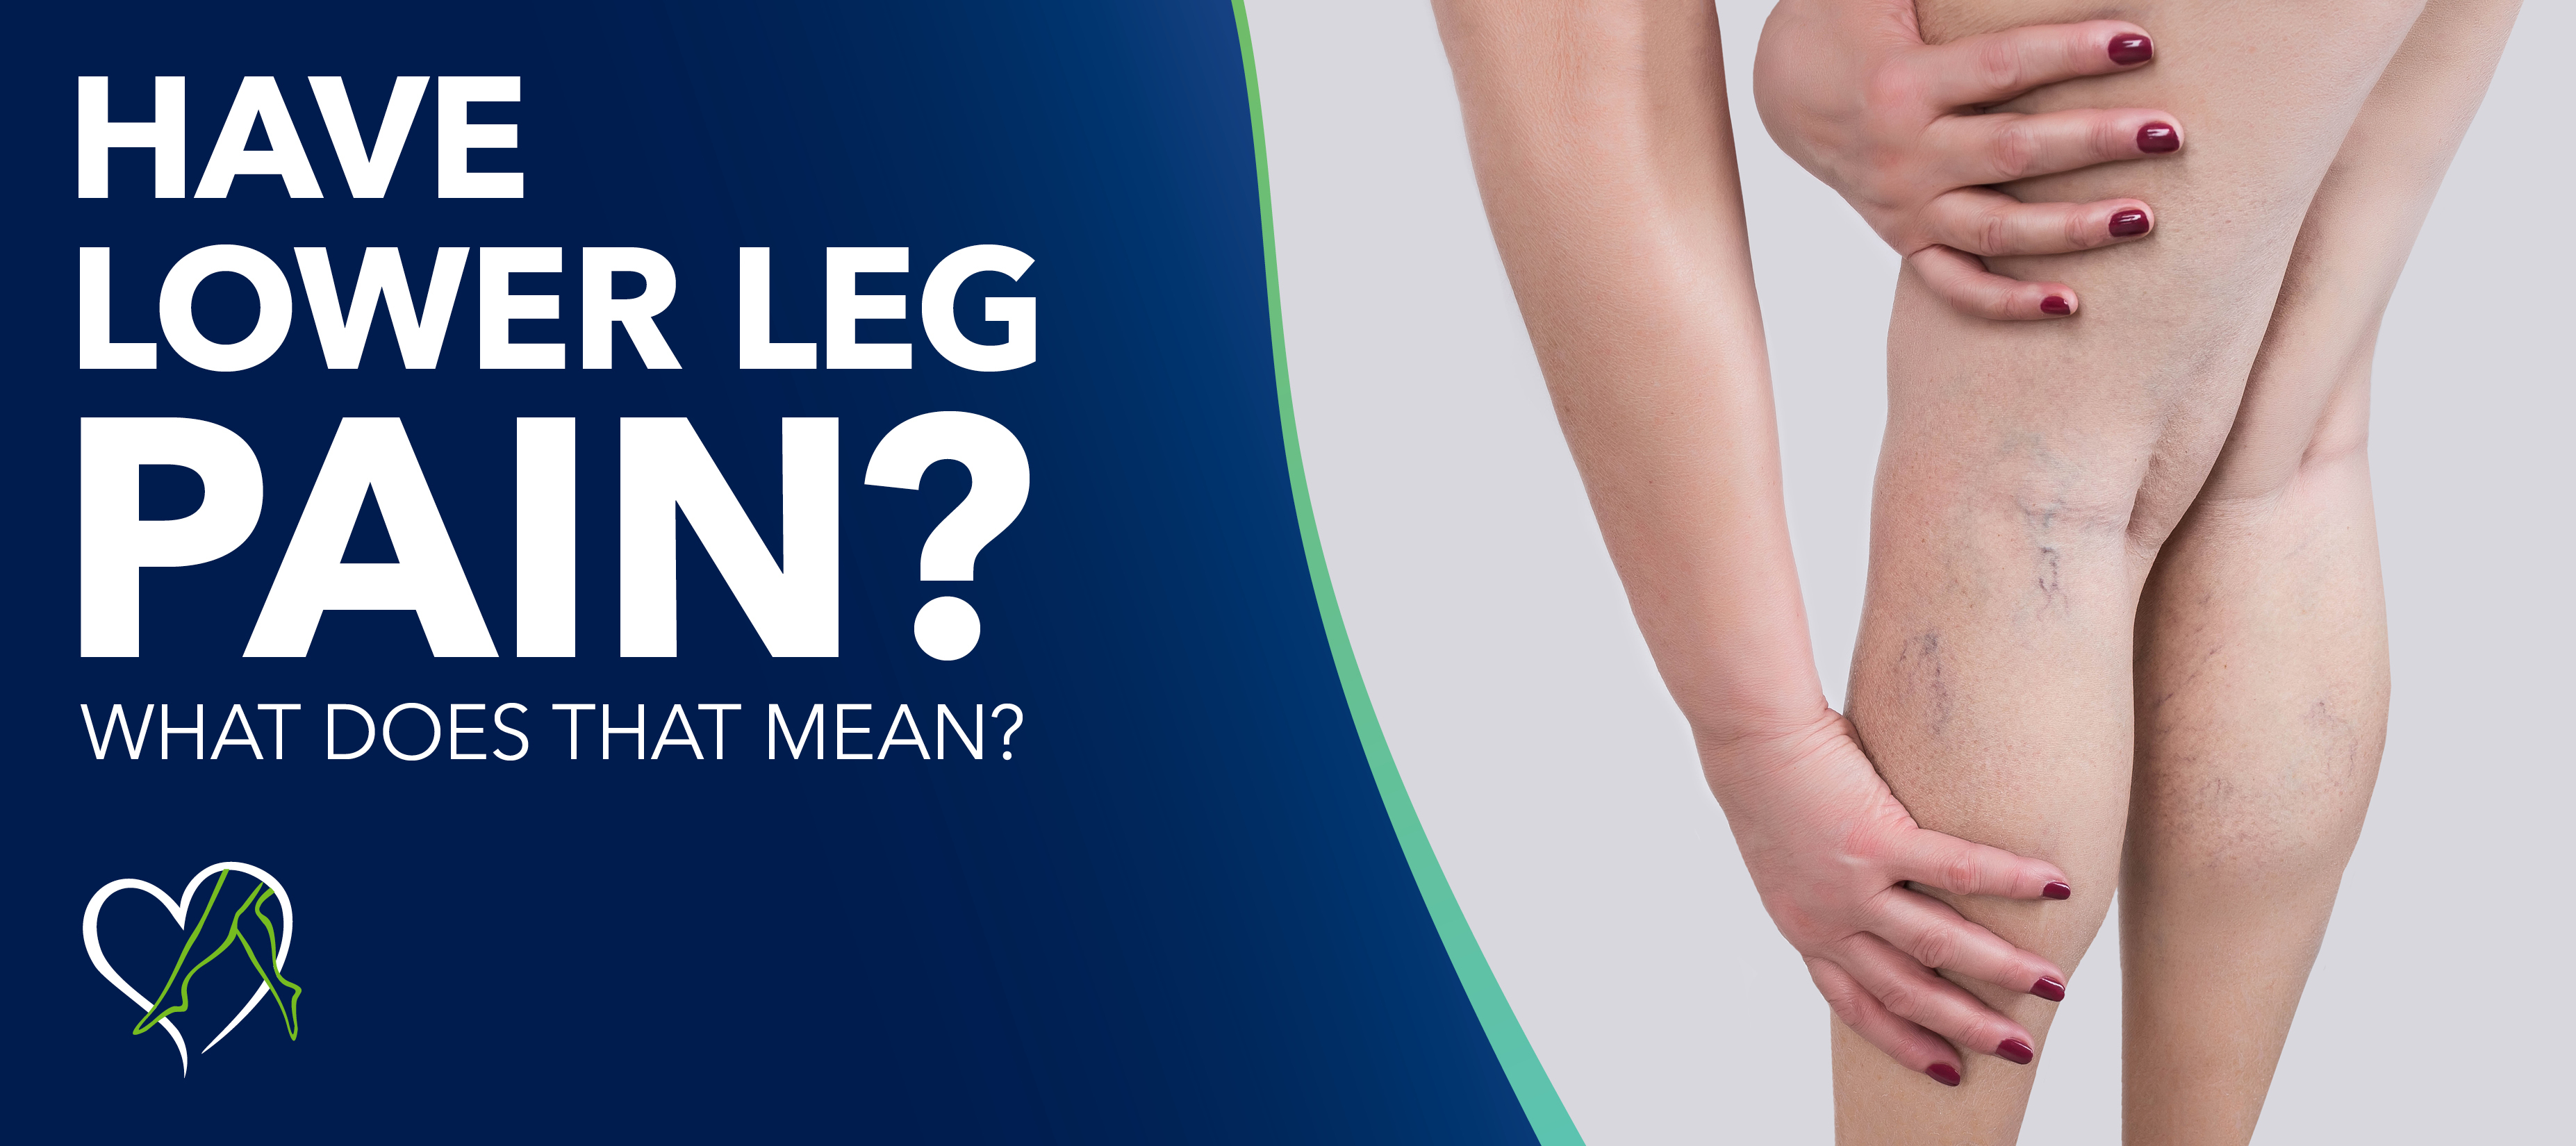 I Have Lower Leg Pain. What Does That Mean?